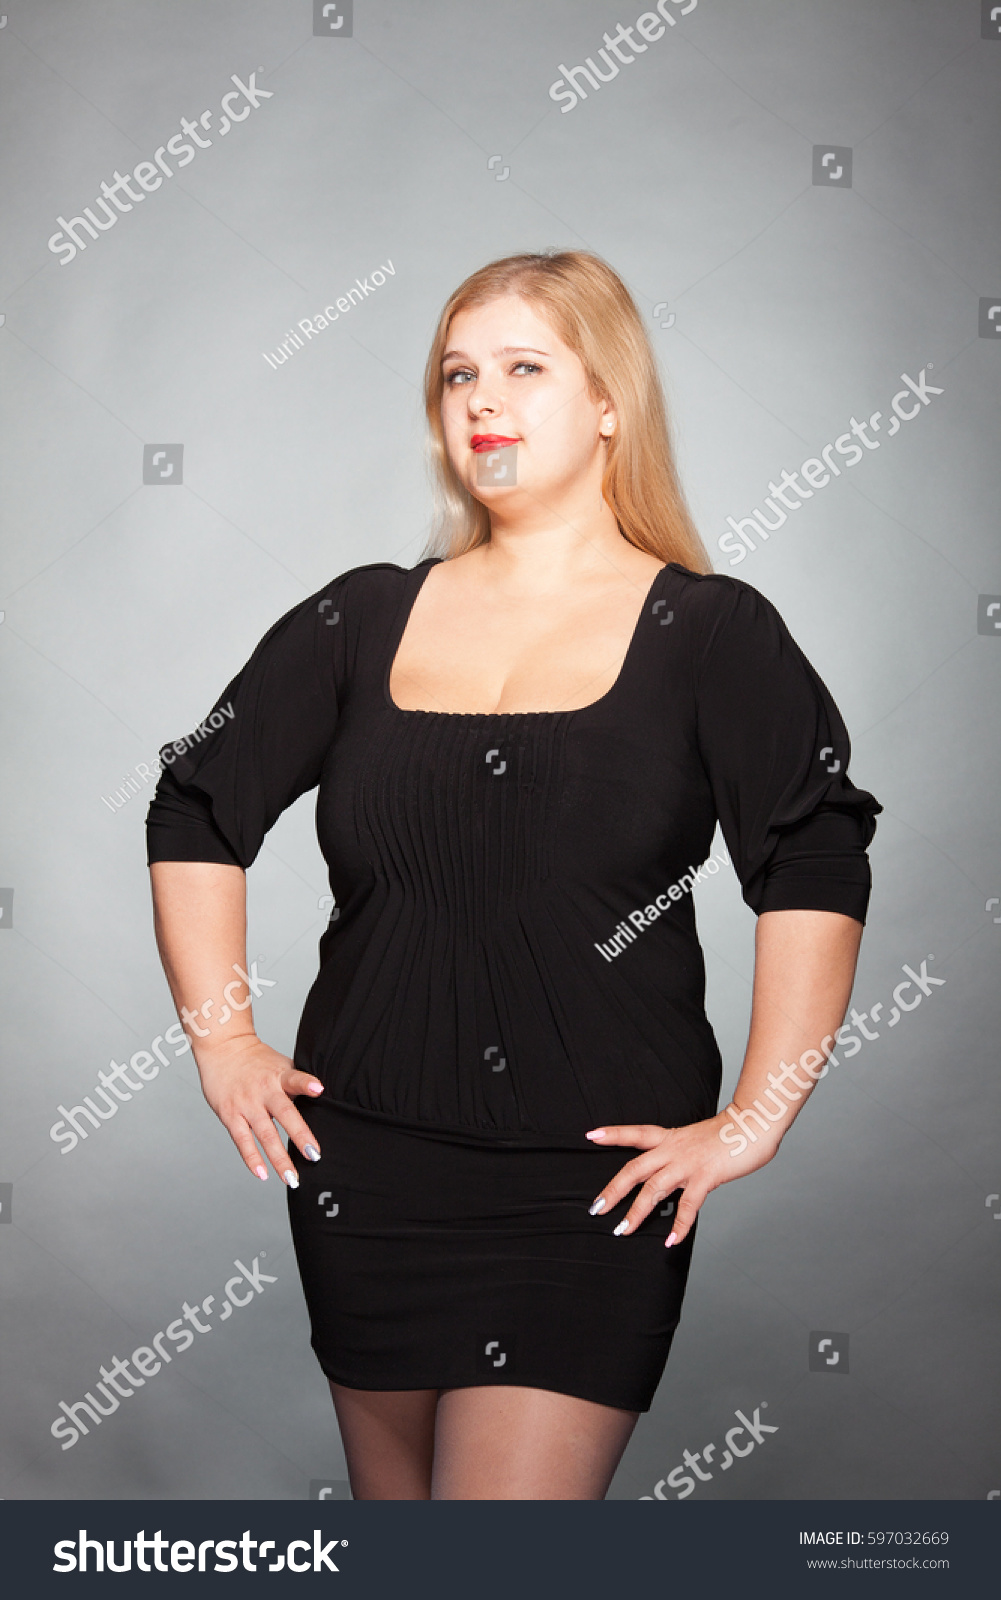 chubby chick wearing black pictures & video